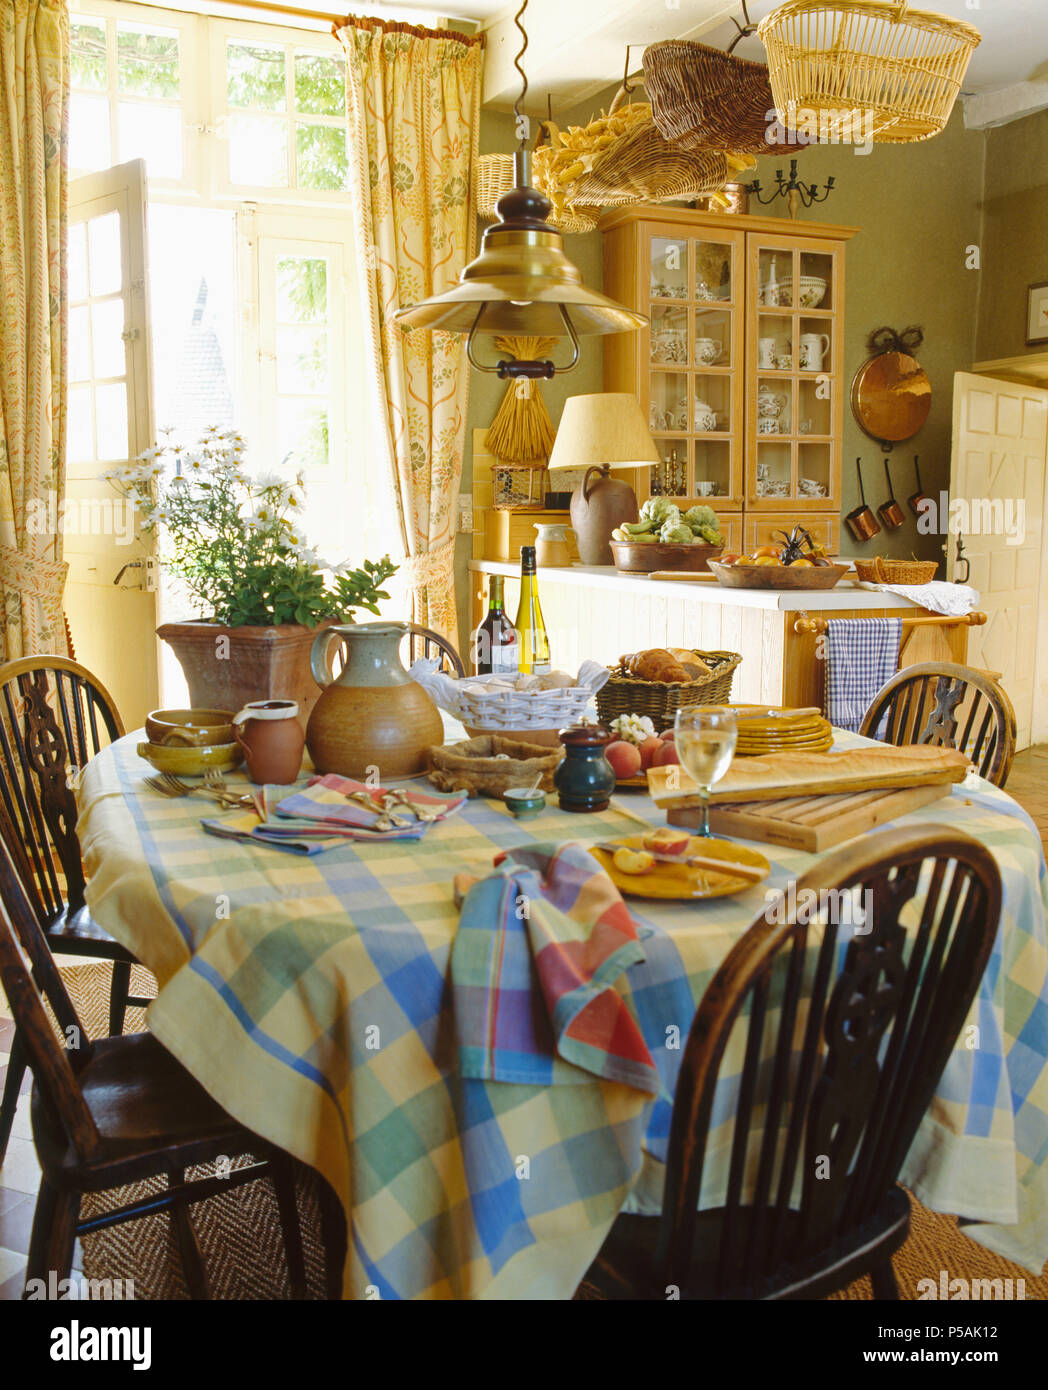 Antique Windsor chairs at table with checked cloth set for breakfast in country kitchen Stock Photo